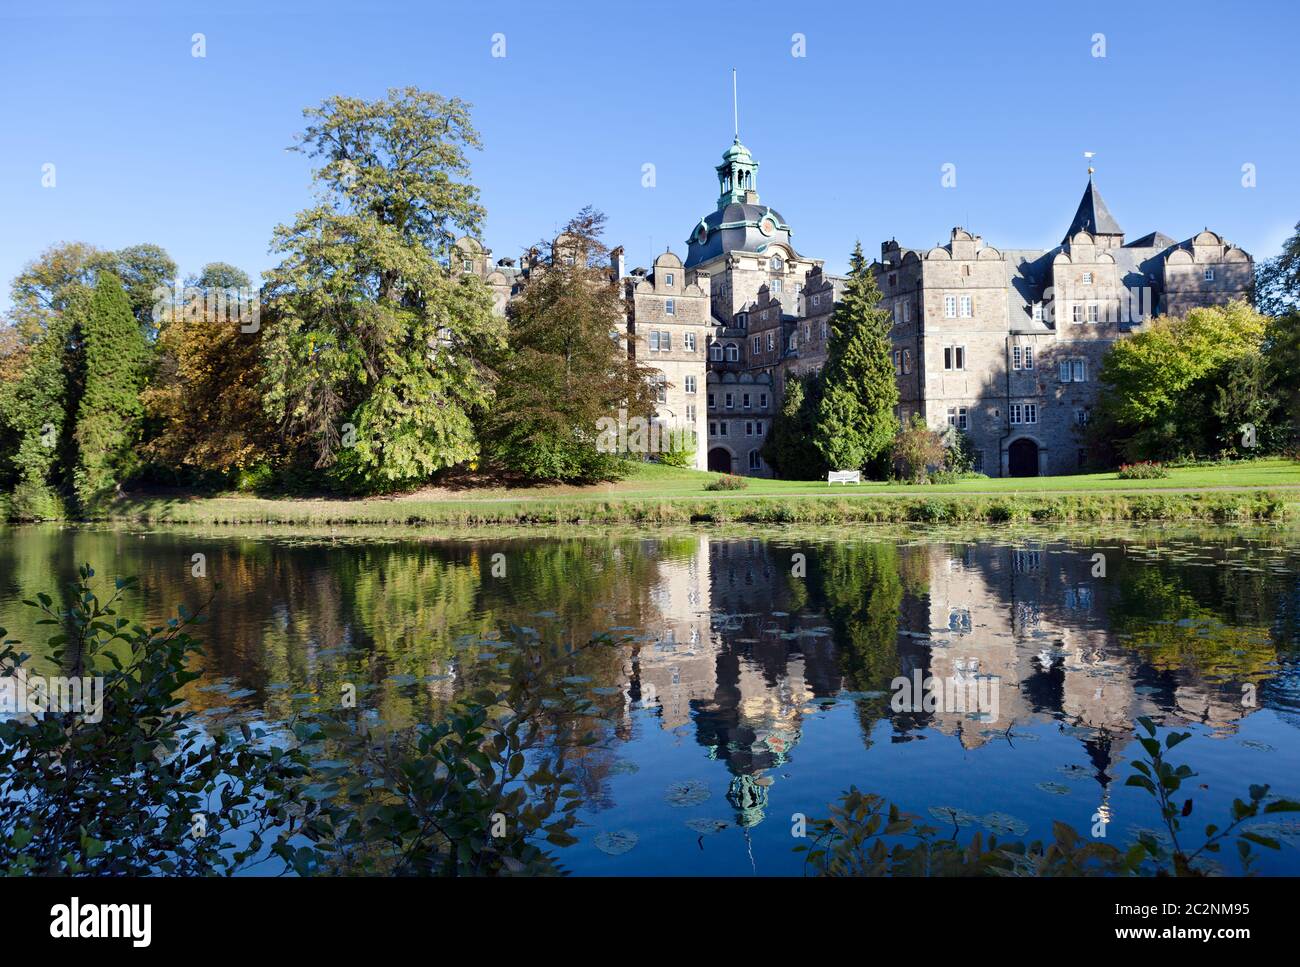 Castle Bueckeburg reflecting in the moat. Germany Stock Photo